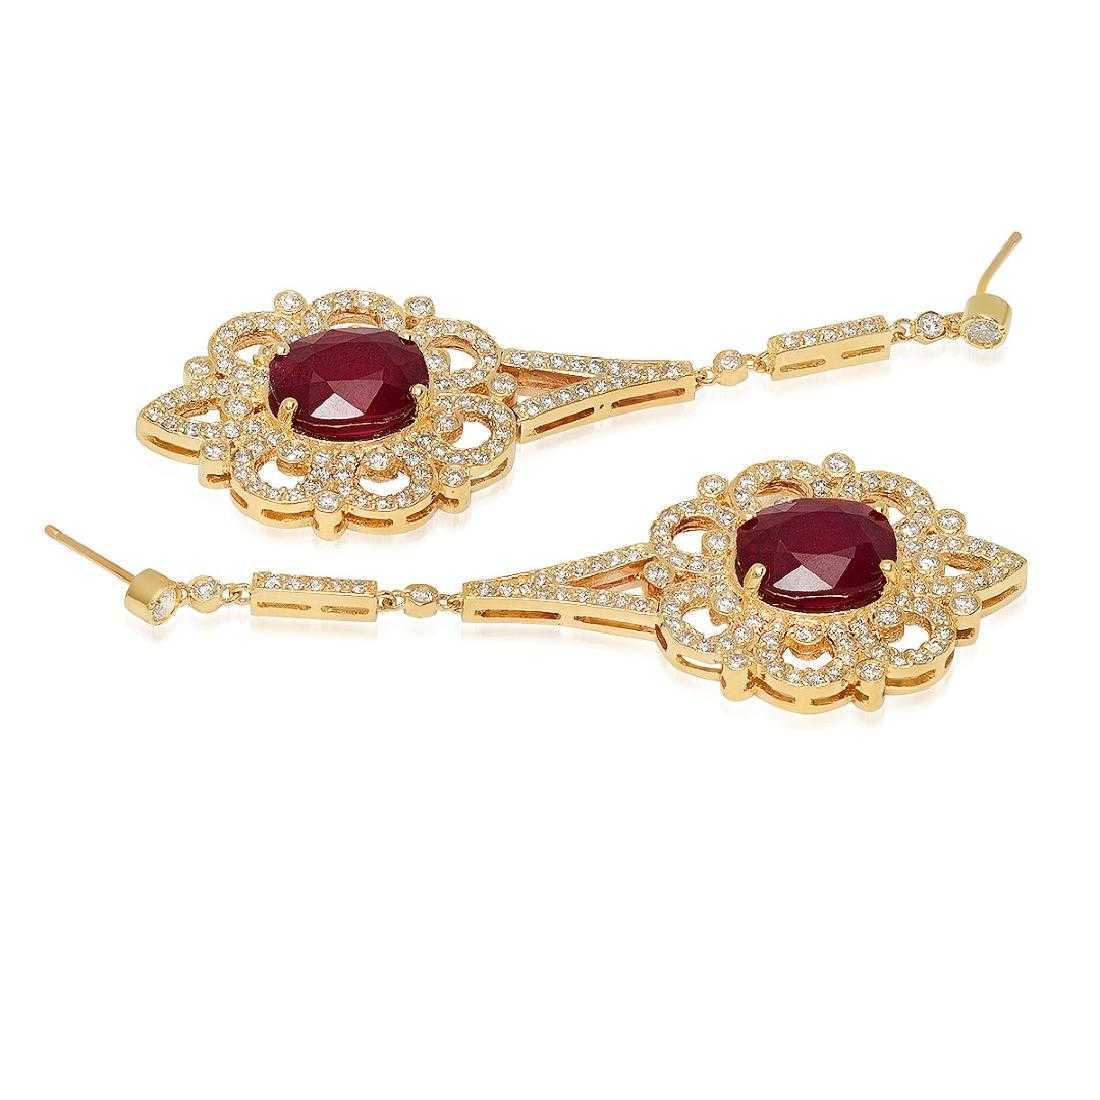 14K Yellow Gold 8.02ct Ruby and 2.56ct Diamond Earrings